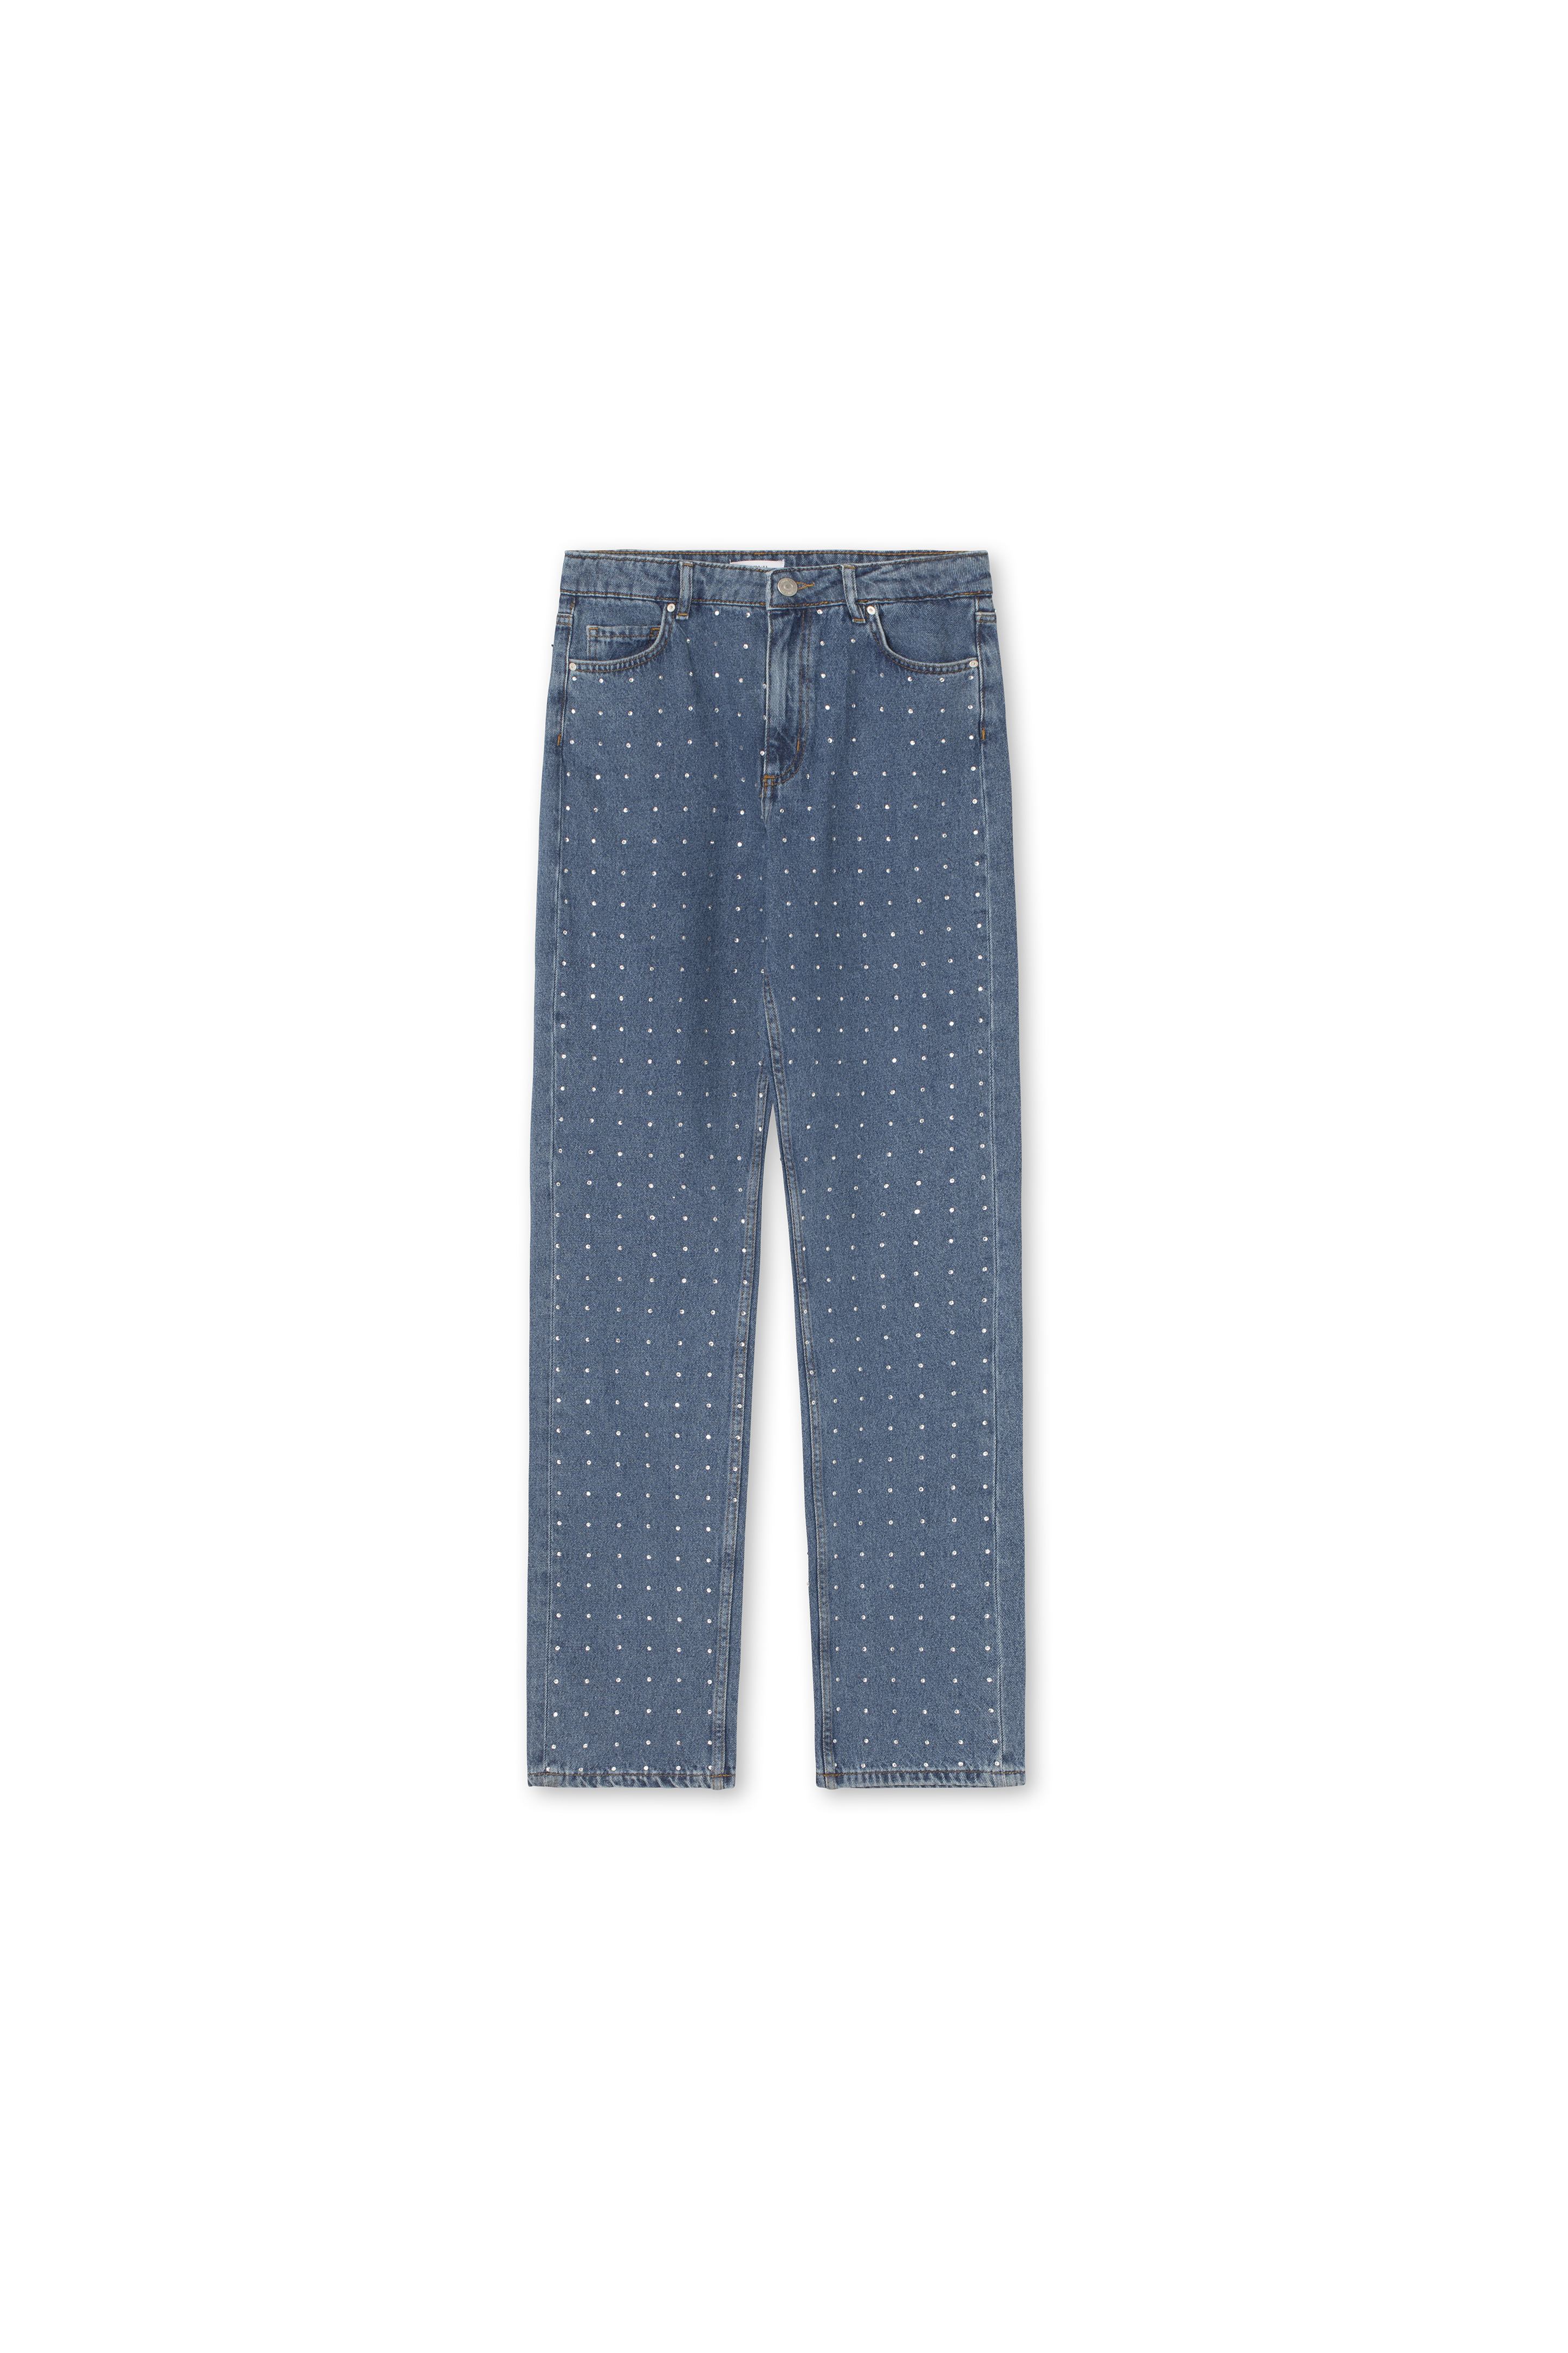 Enbree Straight Jeans